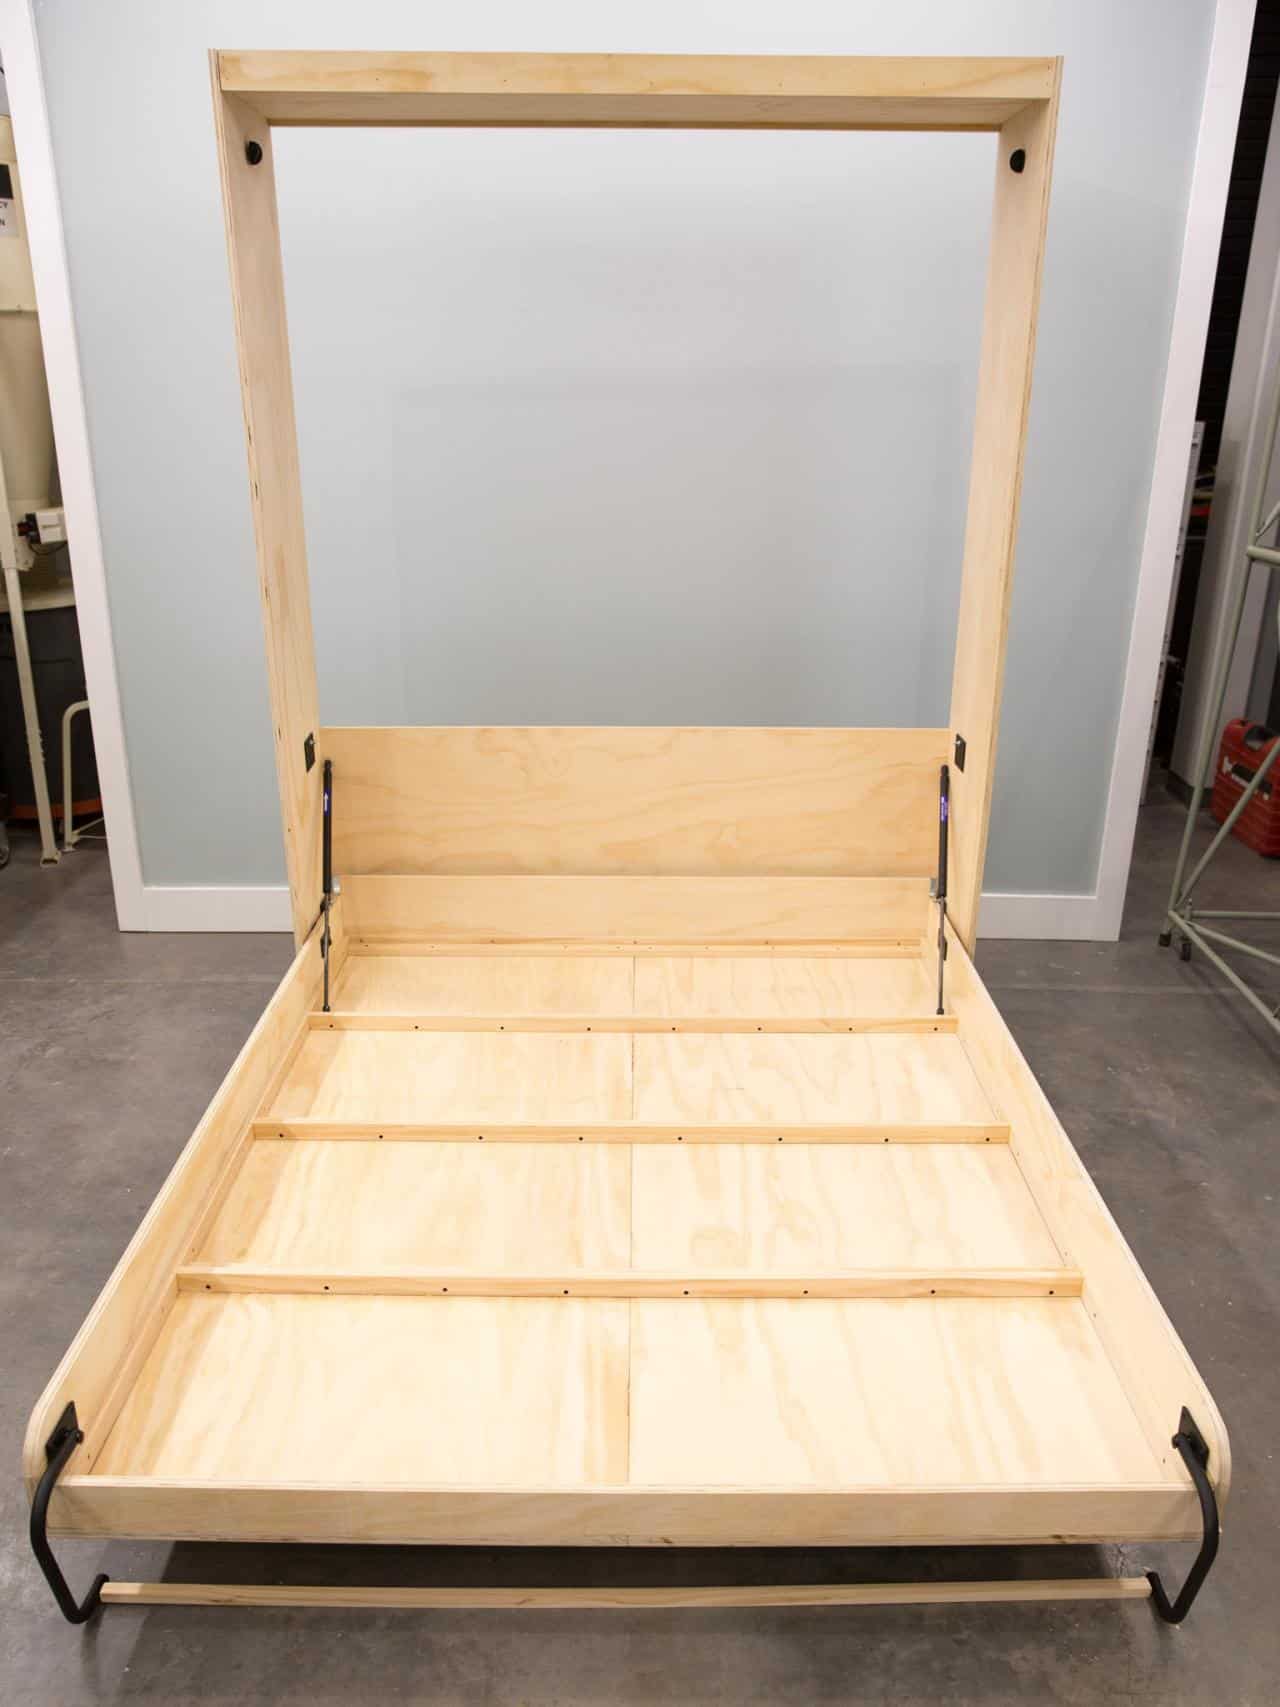 Diy Murphy Bed Ideas For Small Spaces, Diy Collapsible Bed Frame